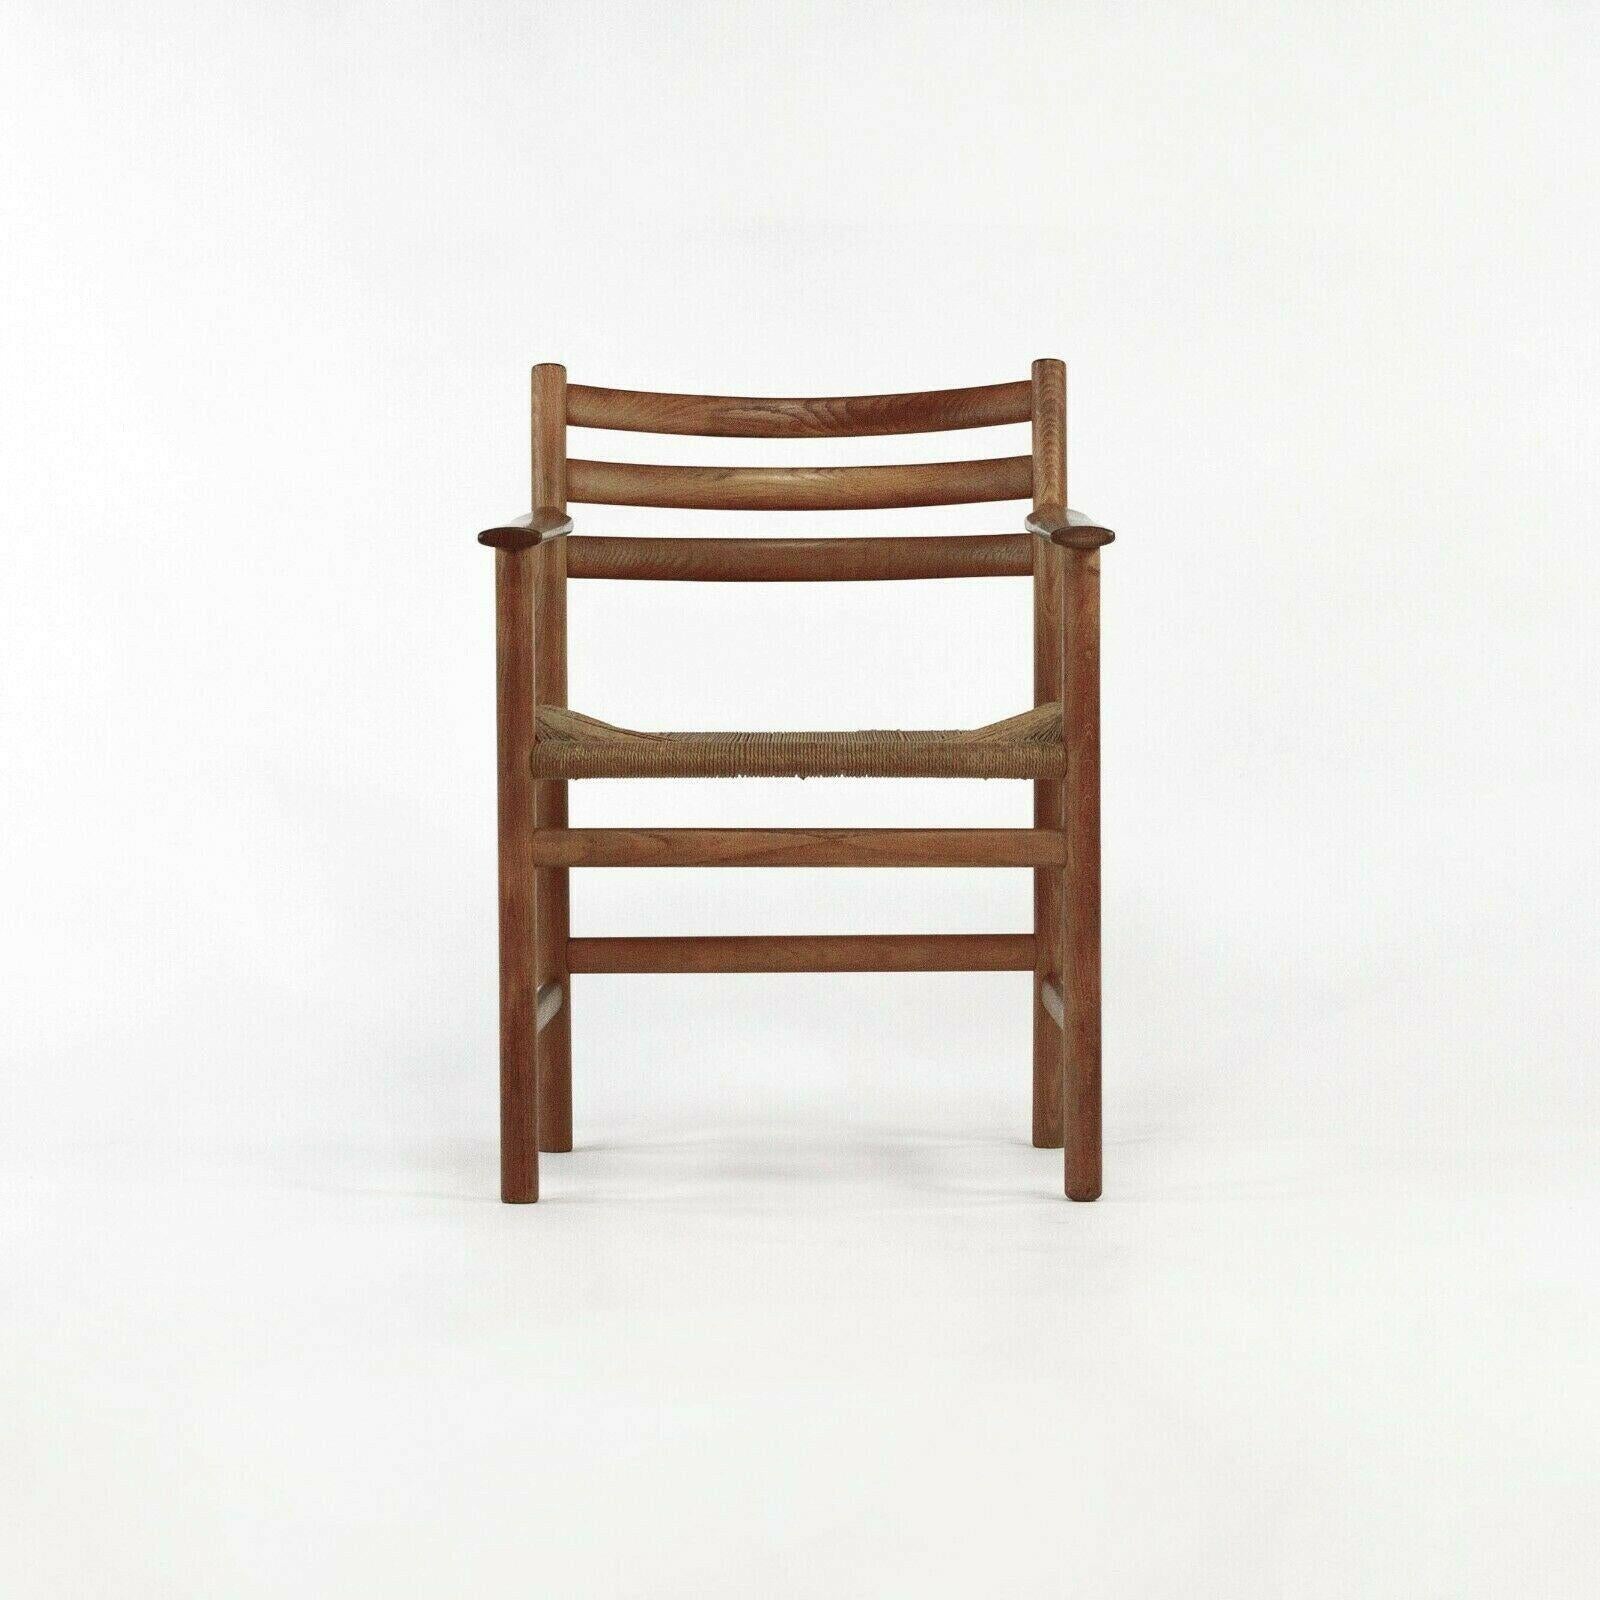 Listed for sale is a 1960s vintage Poul Volther dining chair, model 351, produced by Soro Stolefabrik in Denmark. This is a classic example of Volther's work with lines that are reminiscent of other masters such as Borge Mogensen and Hans Wegner.